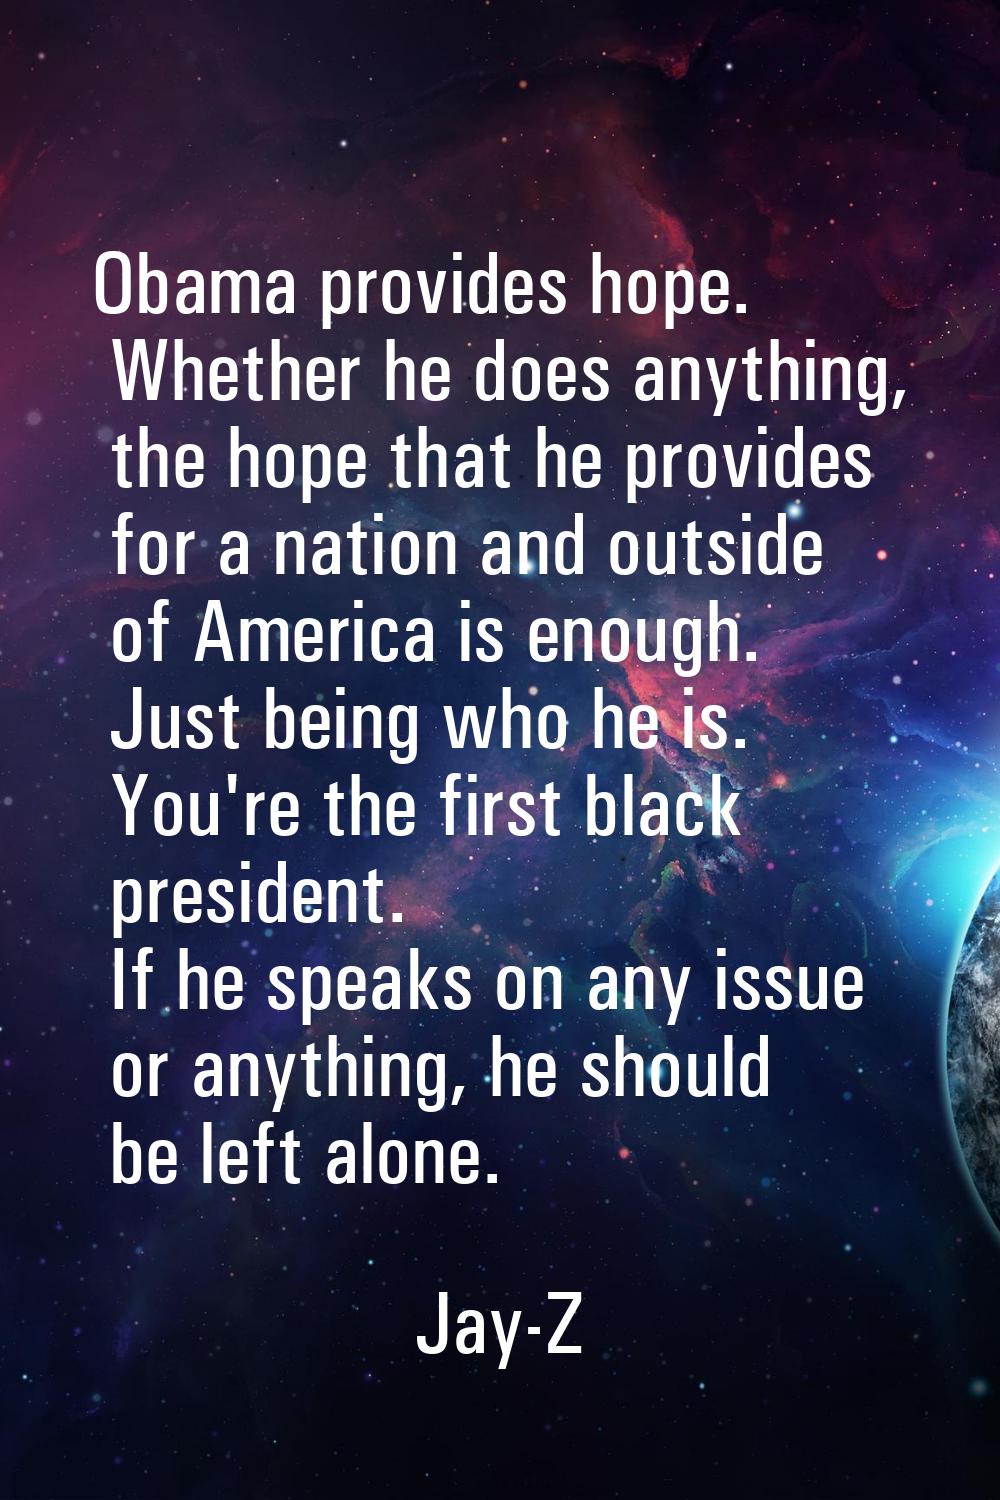 Obama provides hope. Whether he does anything, the hope that he provides for a nation and outside o